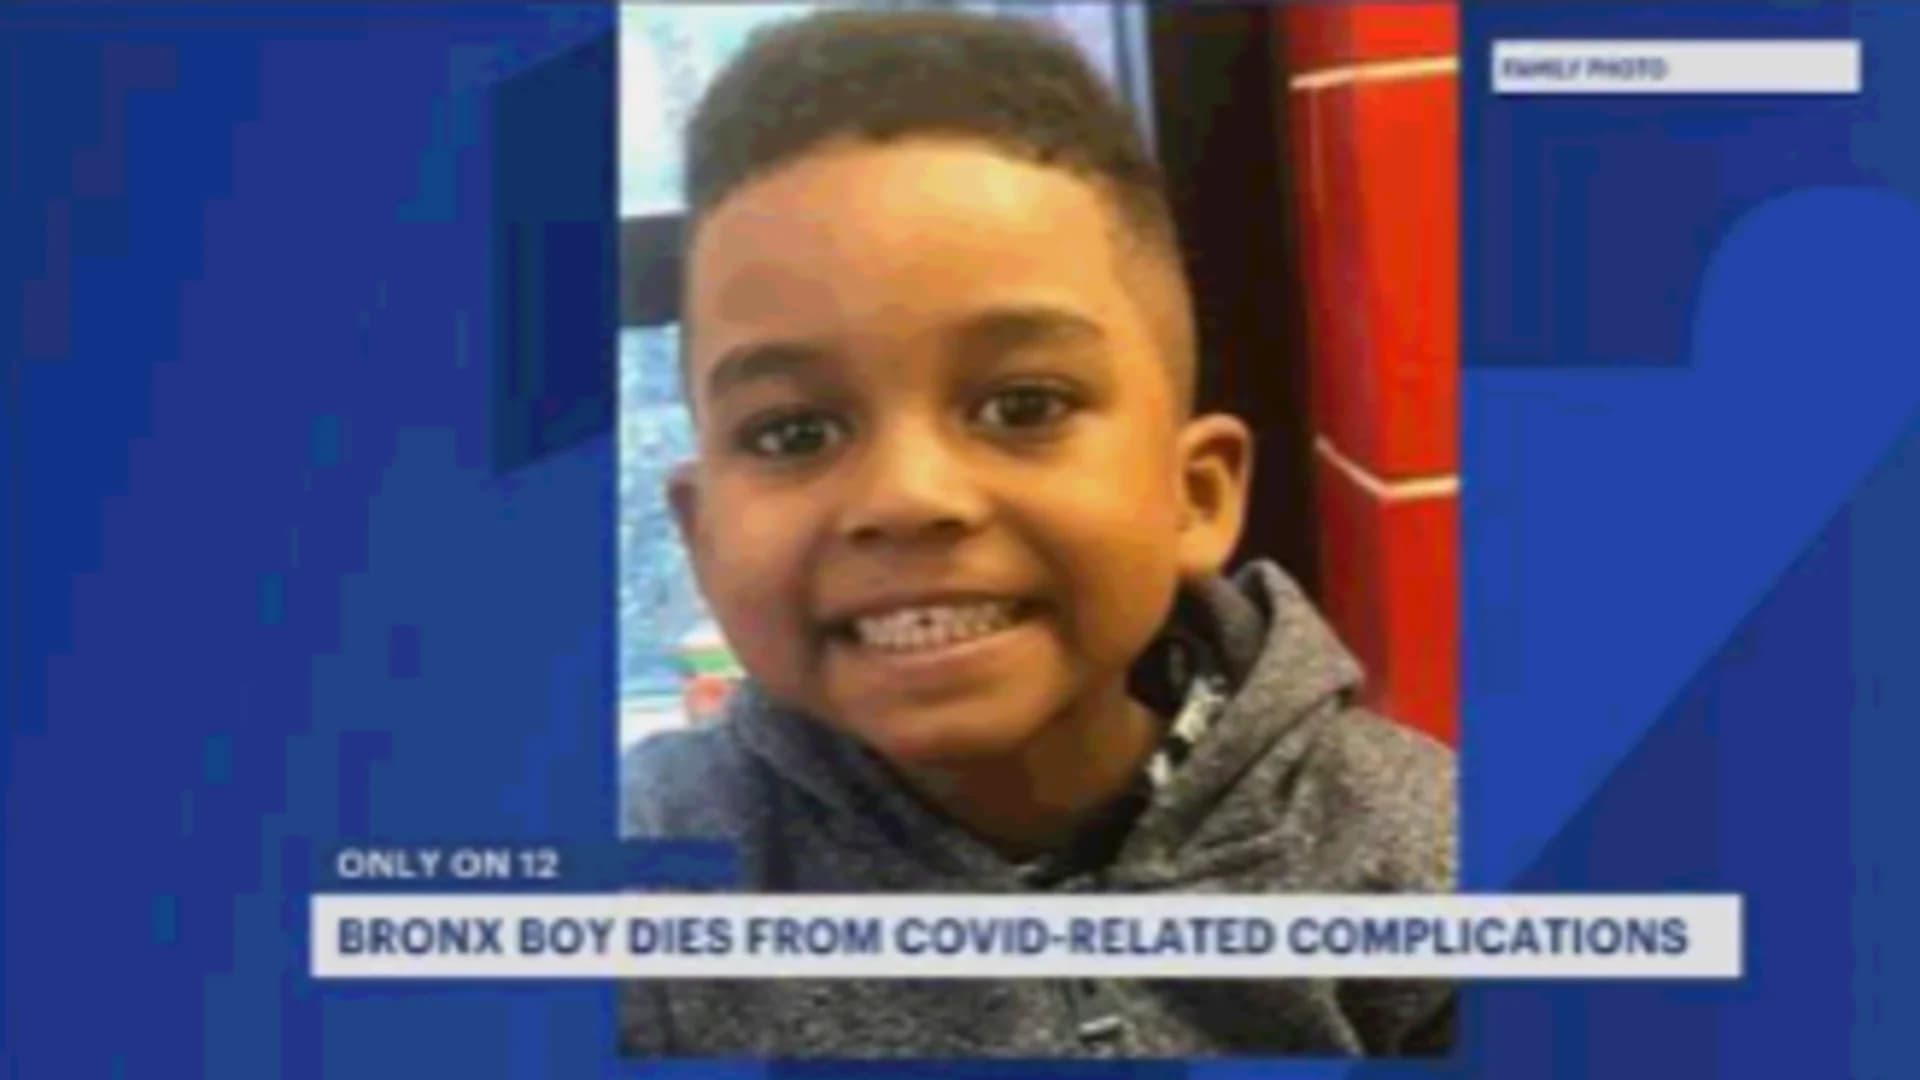 Bronx family mourns loss of 5-year-old due to COVID-19 complications